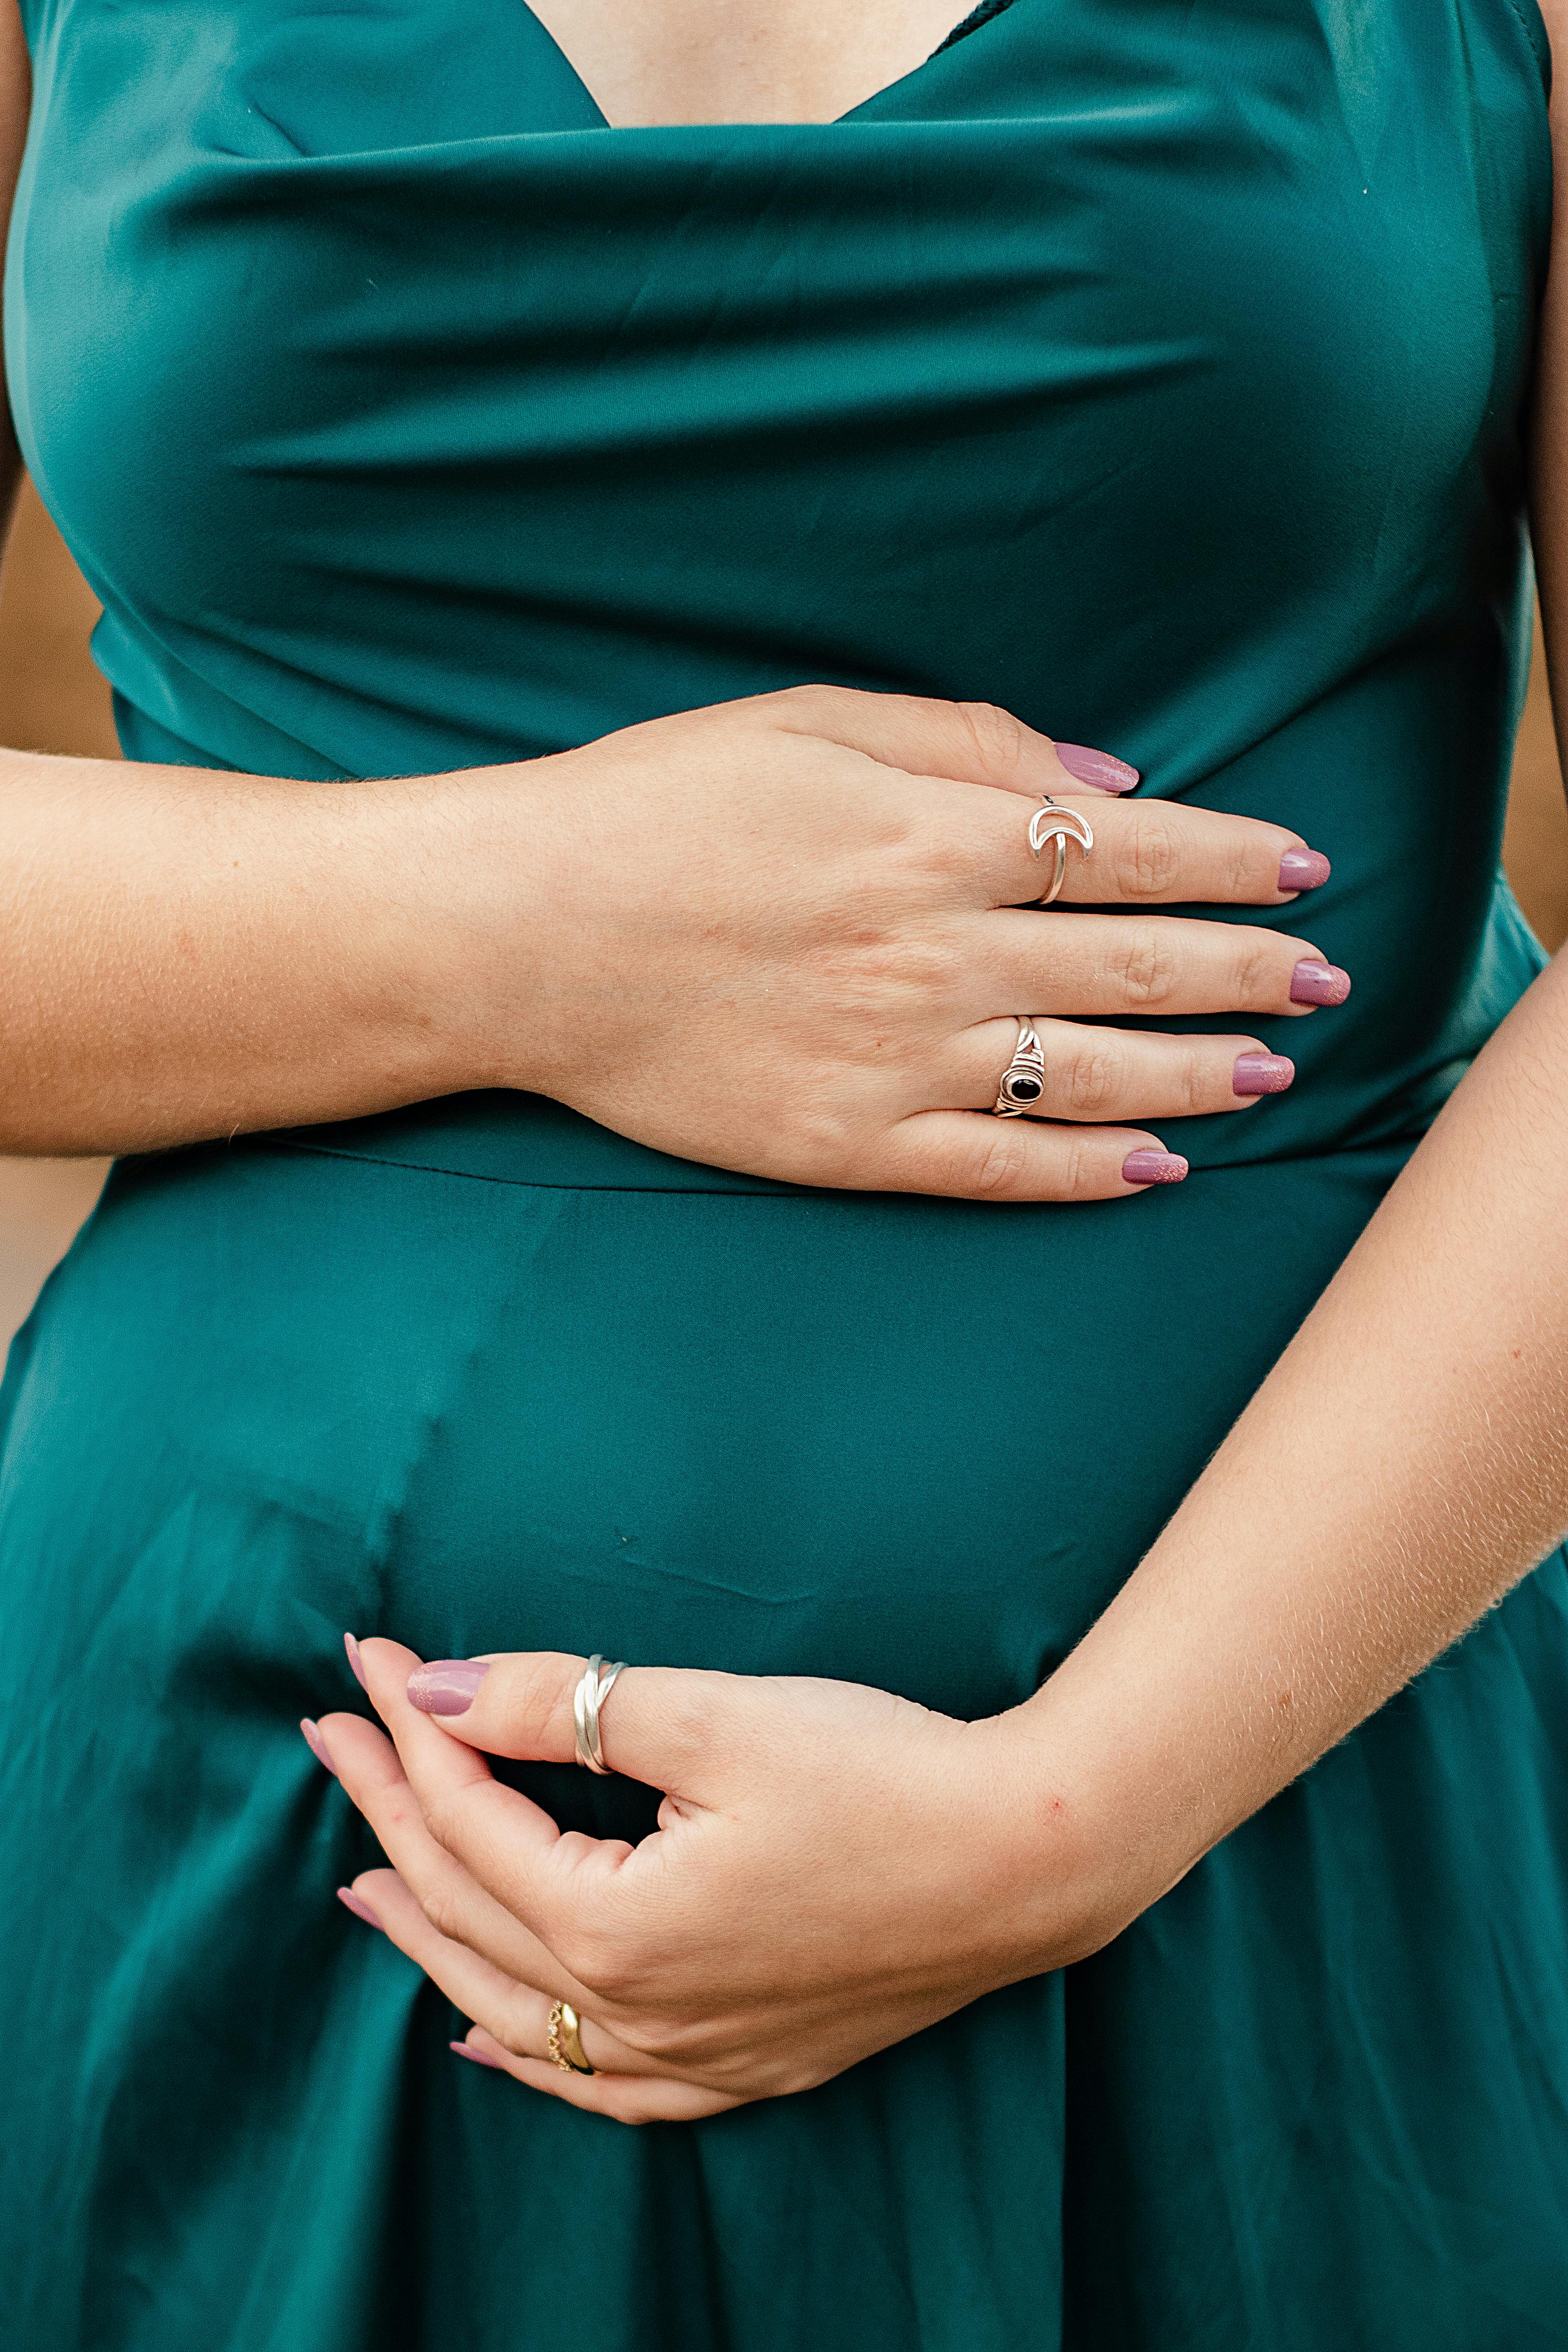 A pregnant woman cradling her baby bump | Source: Pexels